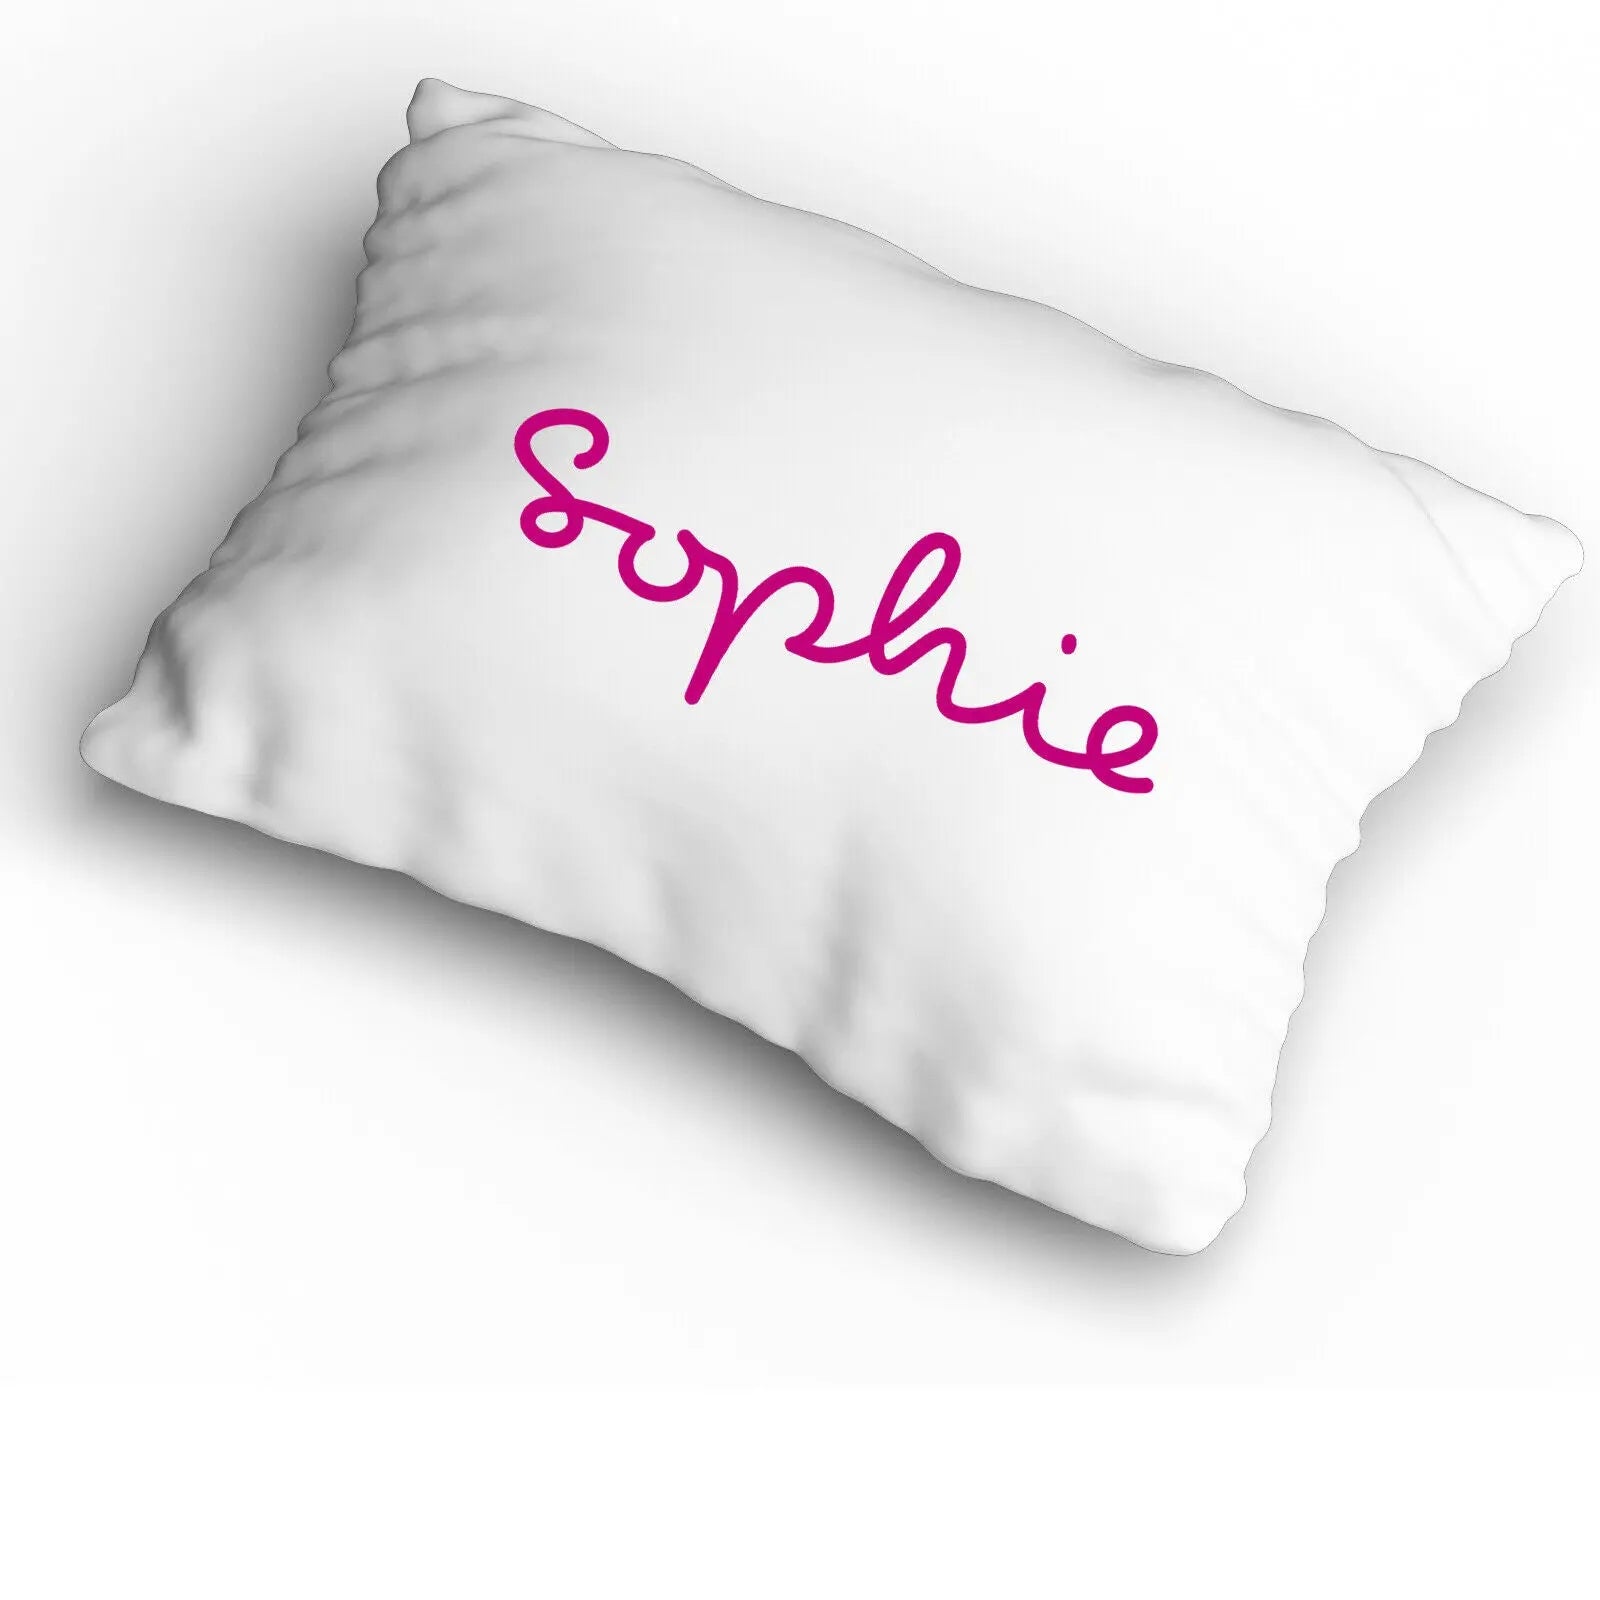 Personalised Name Cover Pillowcase Custom Gift Initials Pillow Case - Deep Pink - CushionPop